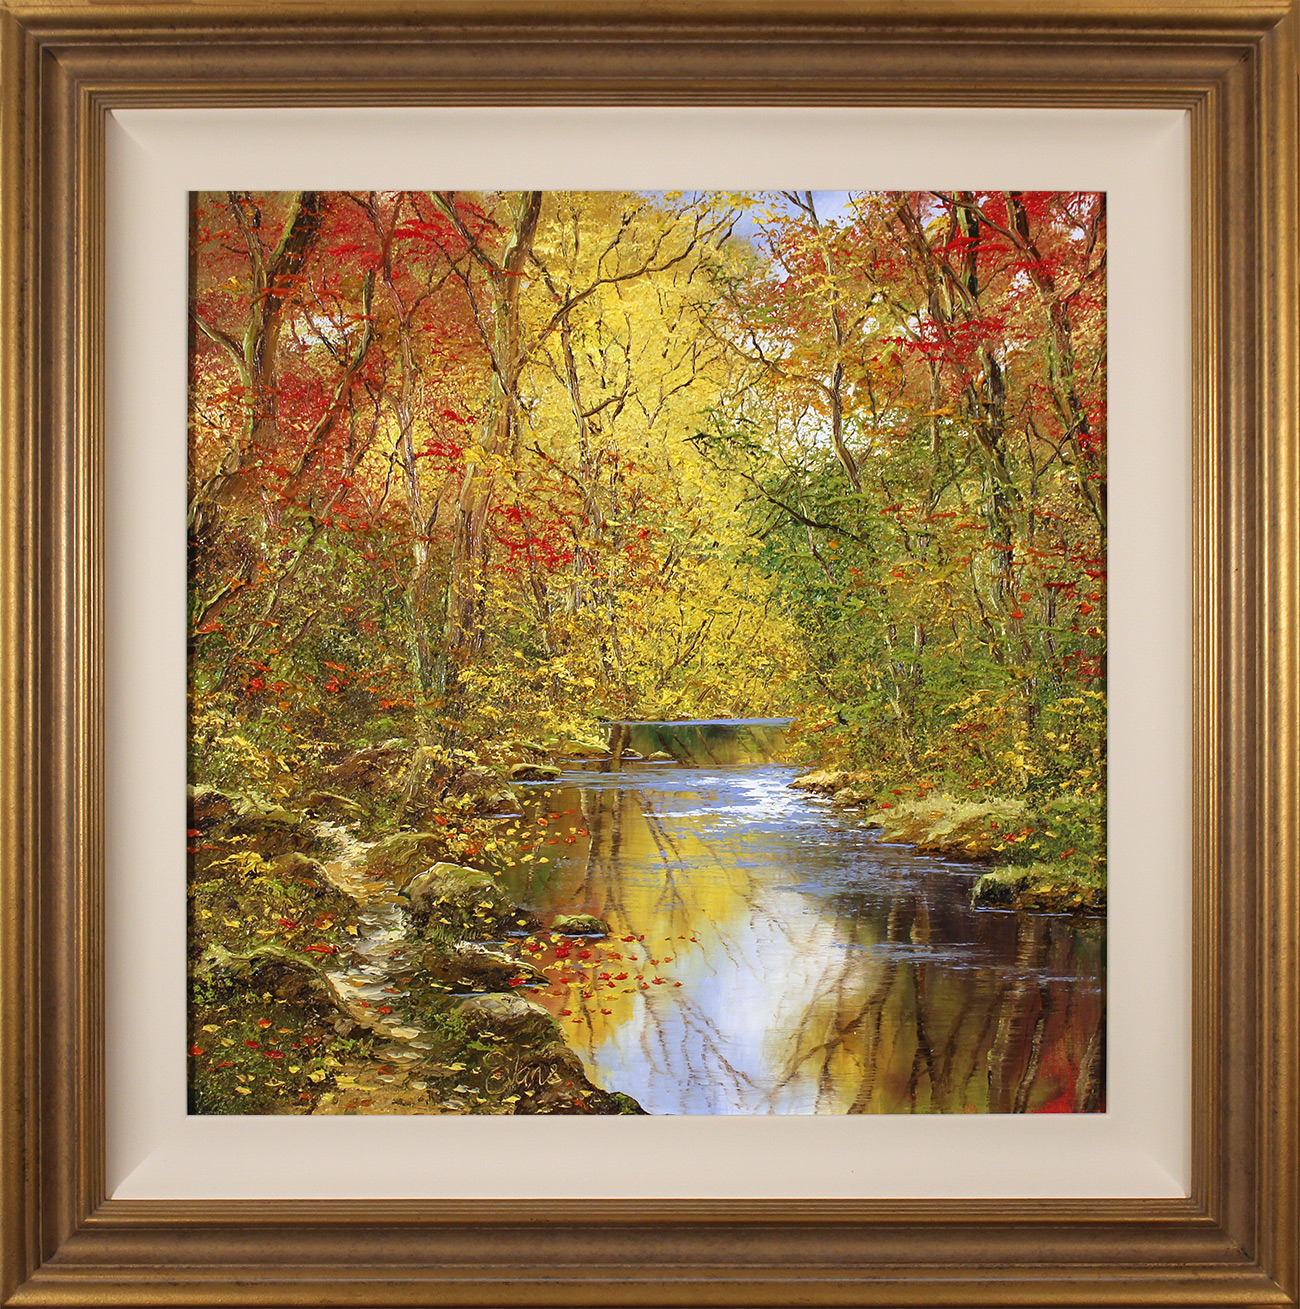 Terry Evans, Original oil painting on canvas, Autumn Glory. Click to enlarge